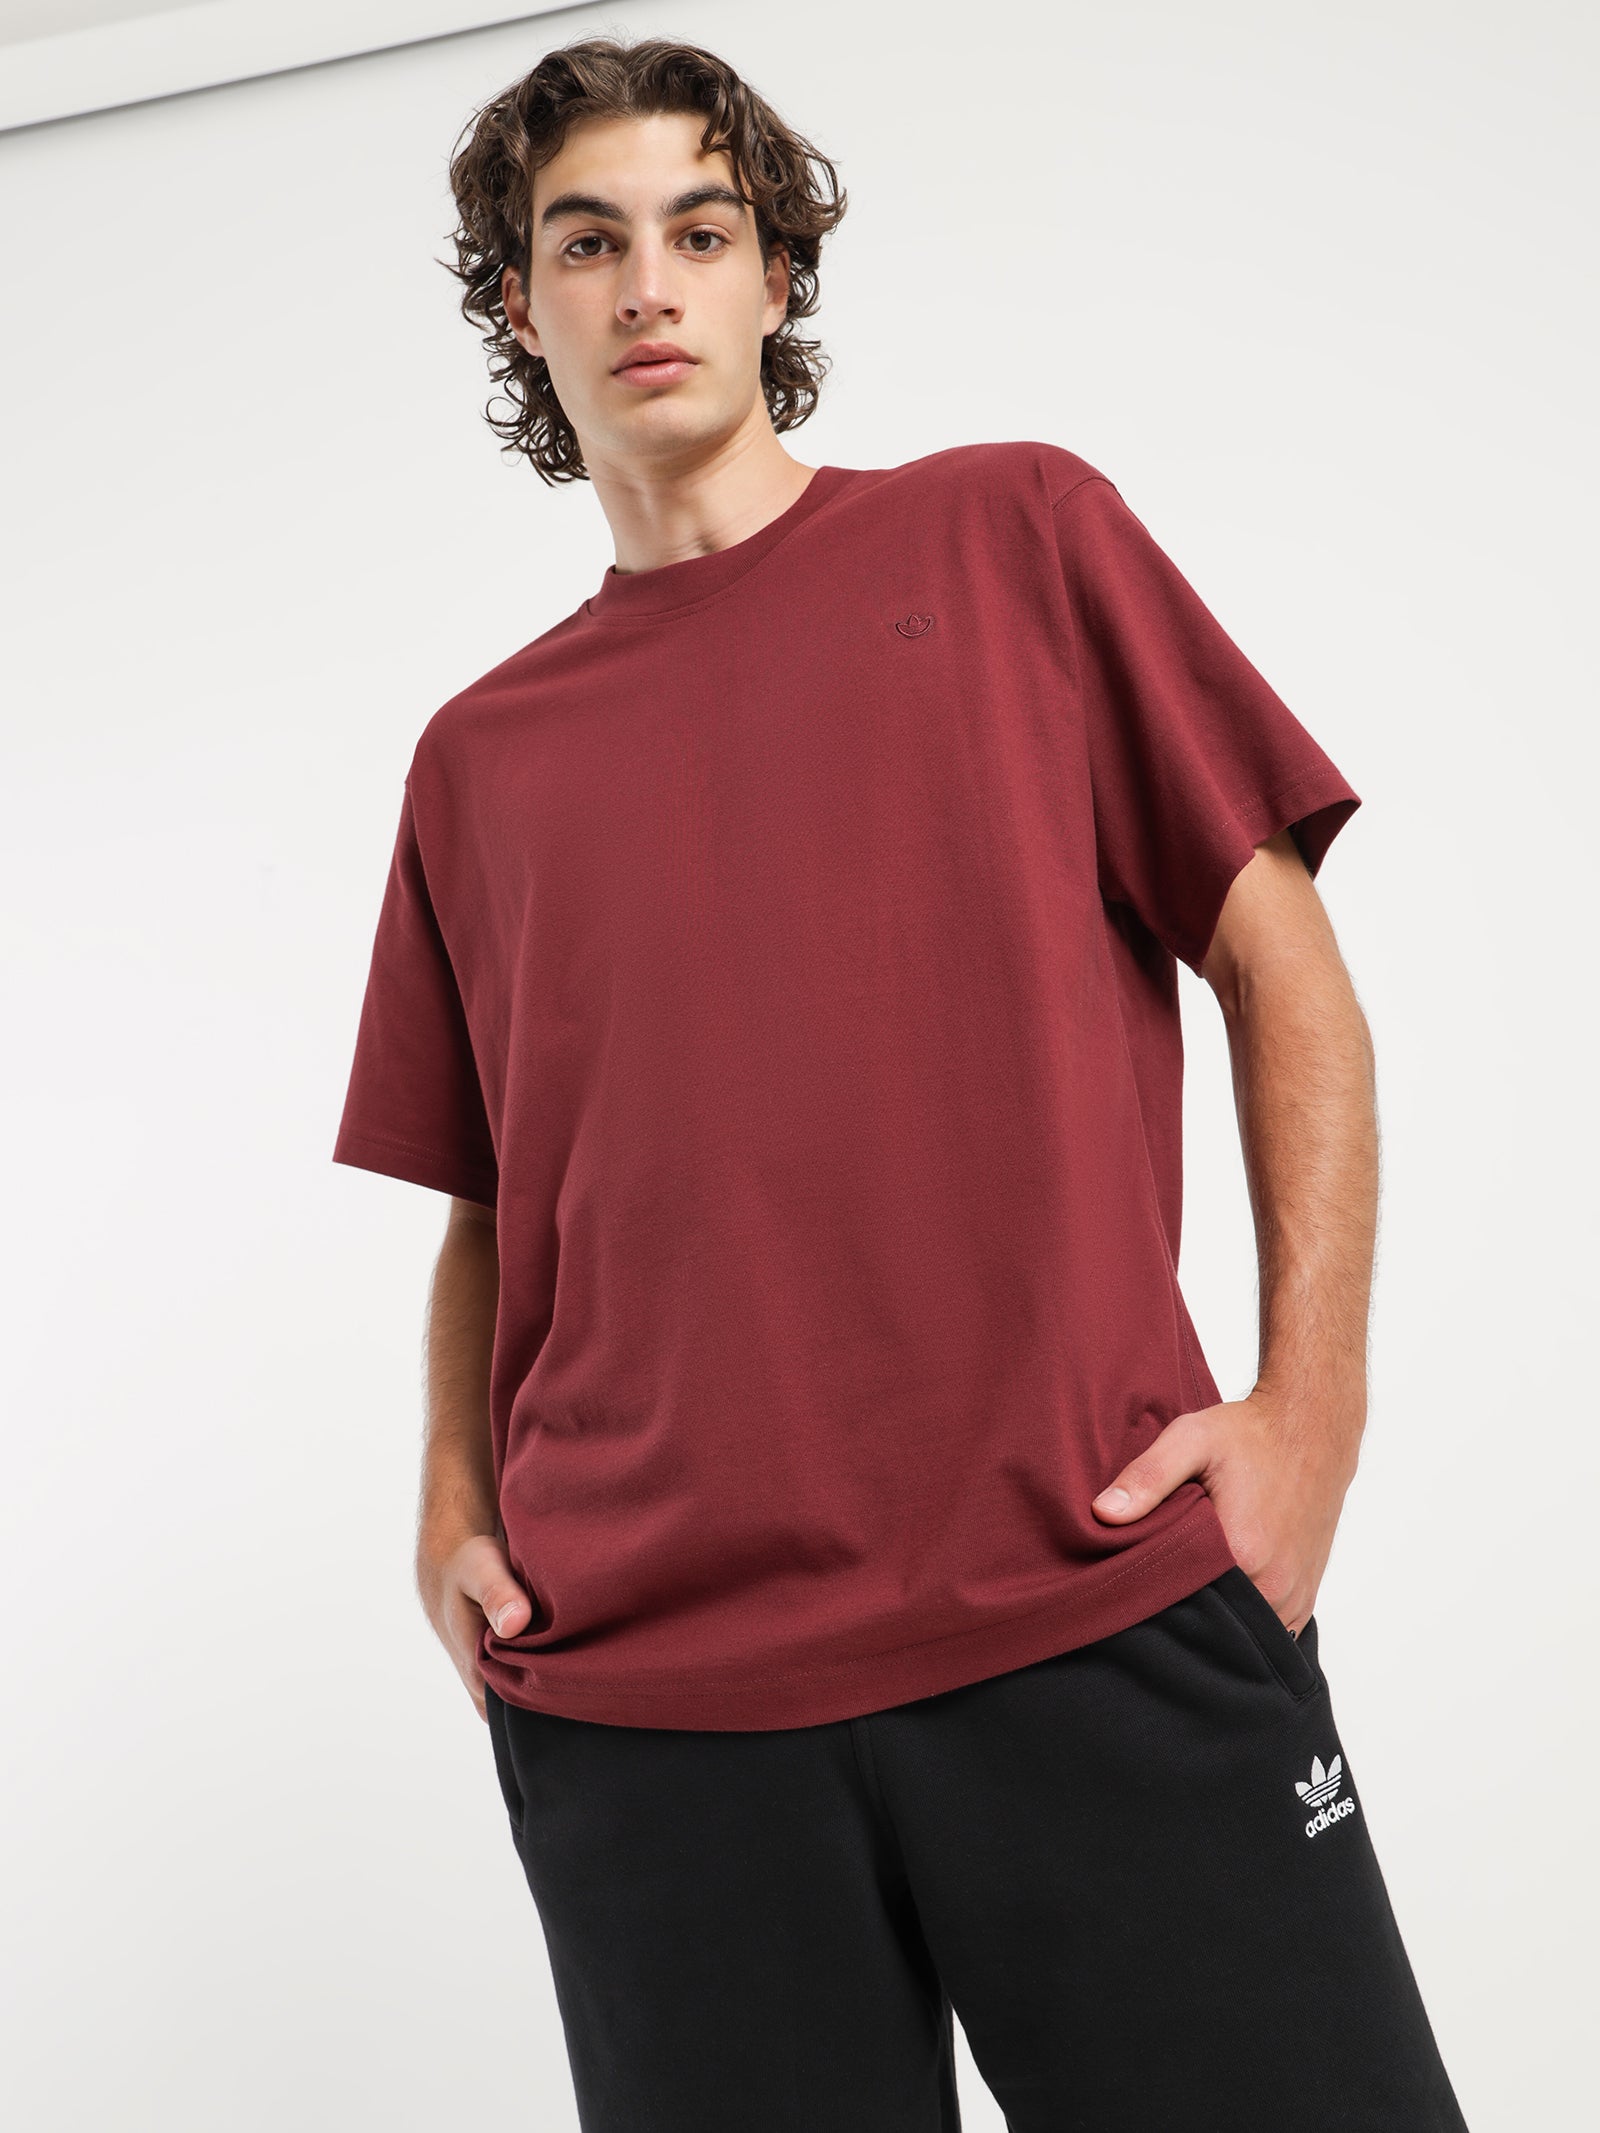 Contempo Store Shadow in Adicolor T-Shirt Red - Glue